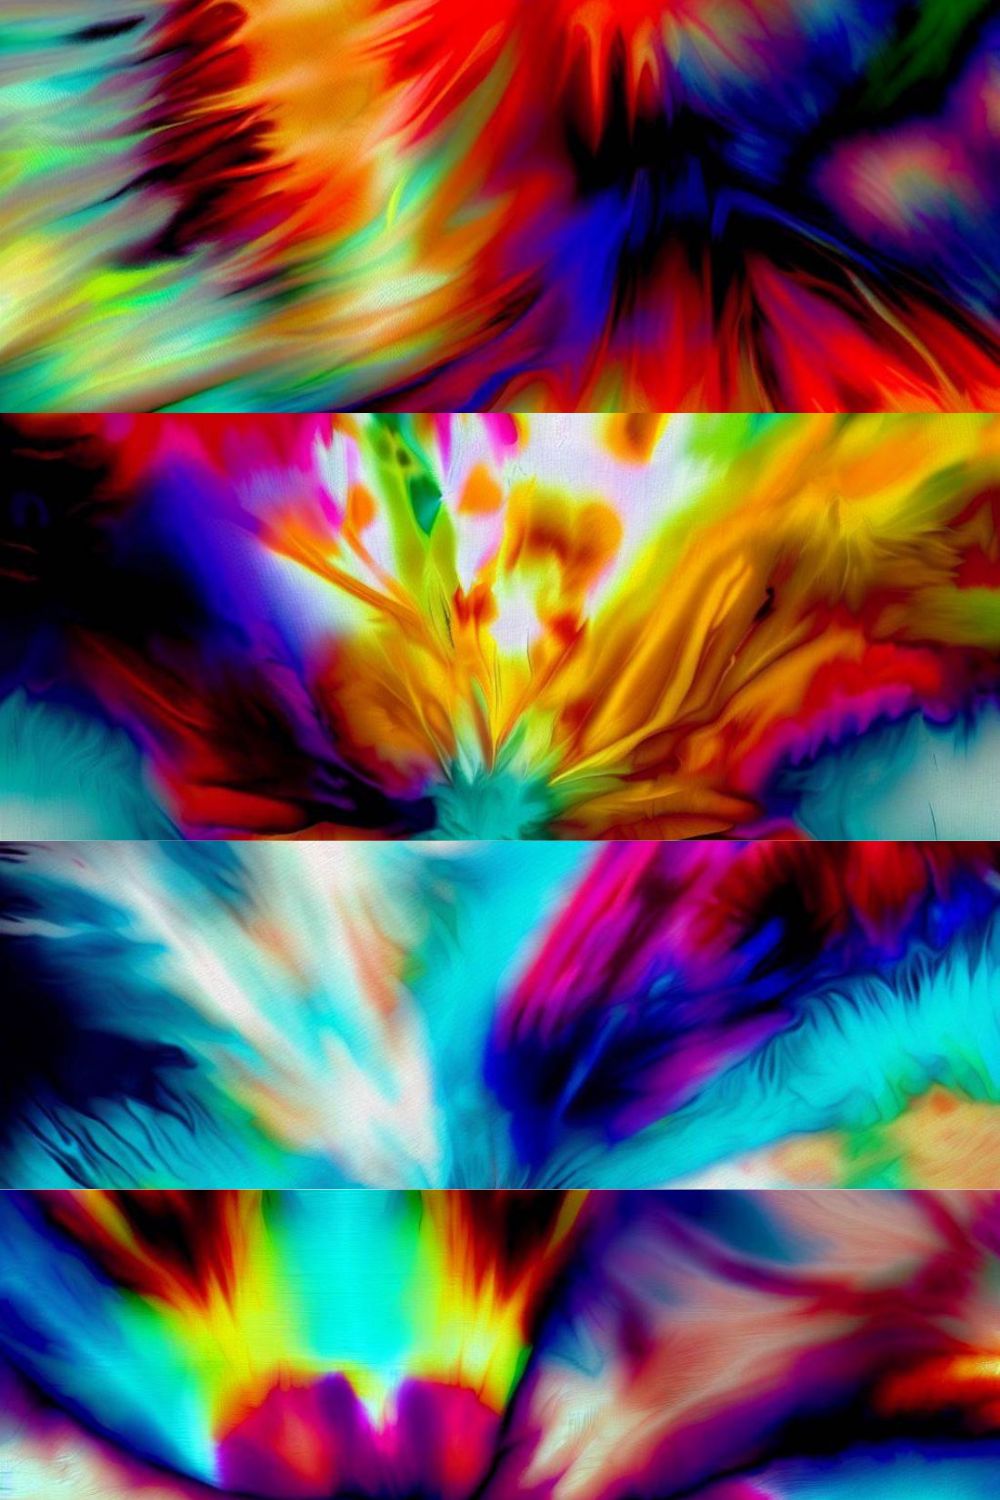 4 Tie dye psychedelic background images in varoius colour combinations pinterest preview image.